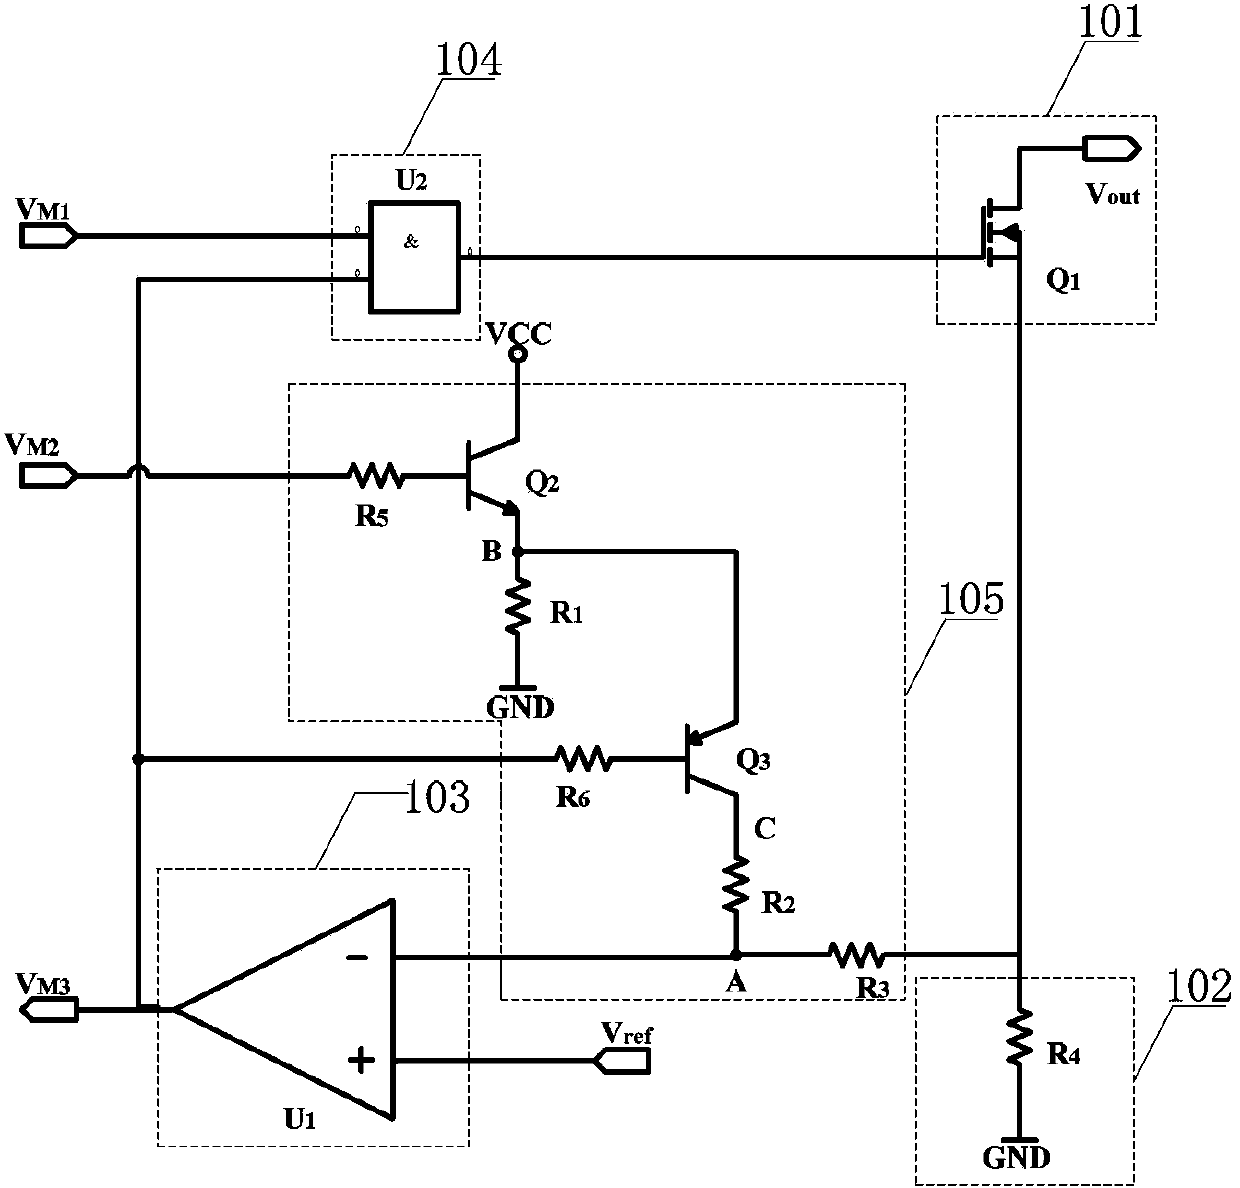 Overcurrent detection and protection circuit